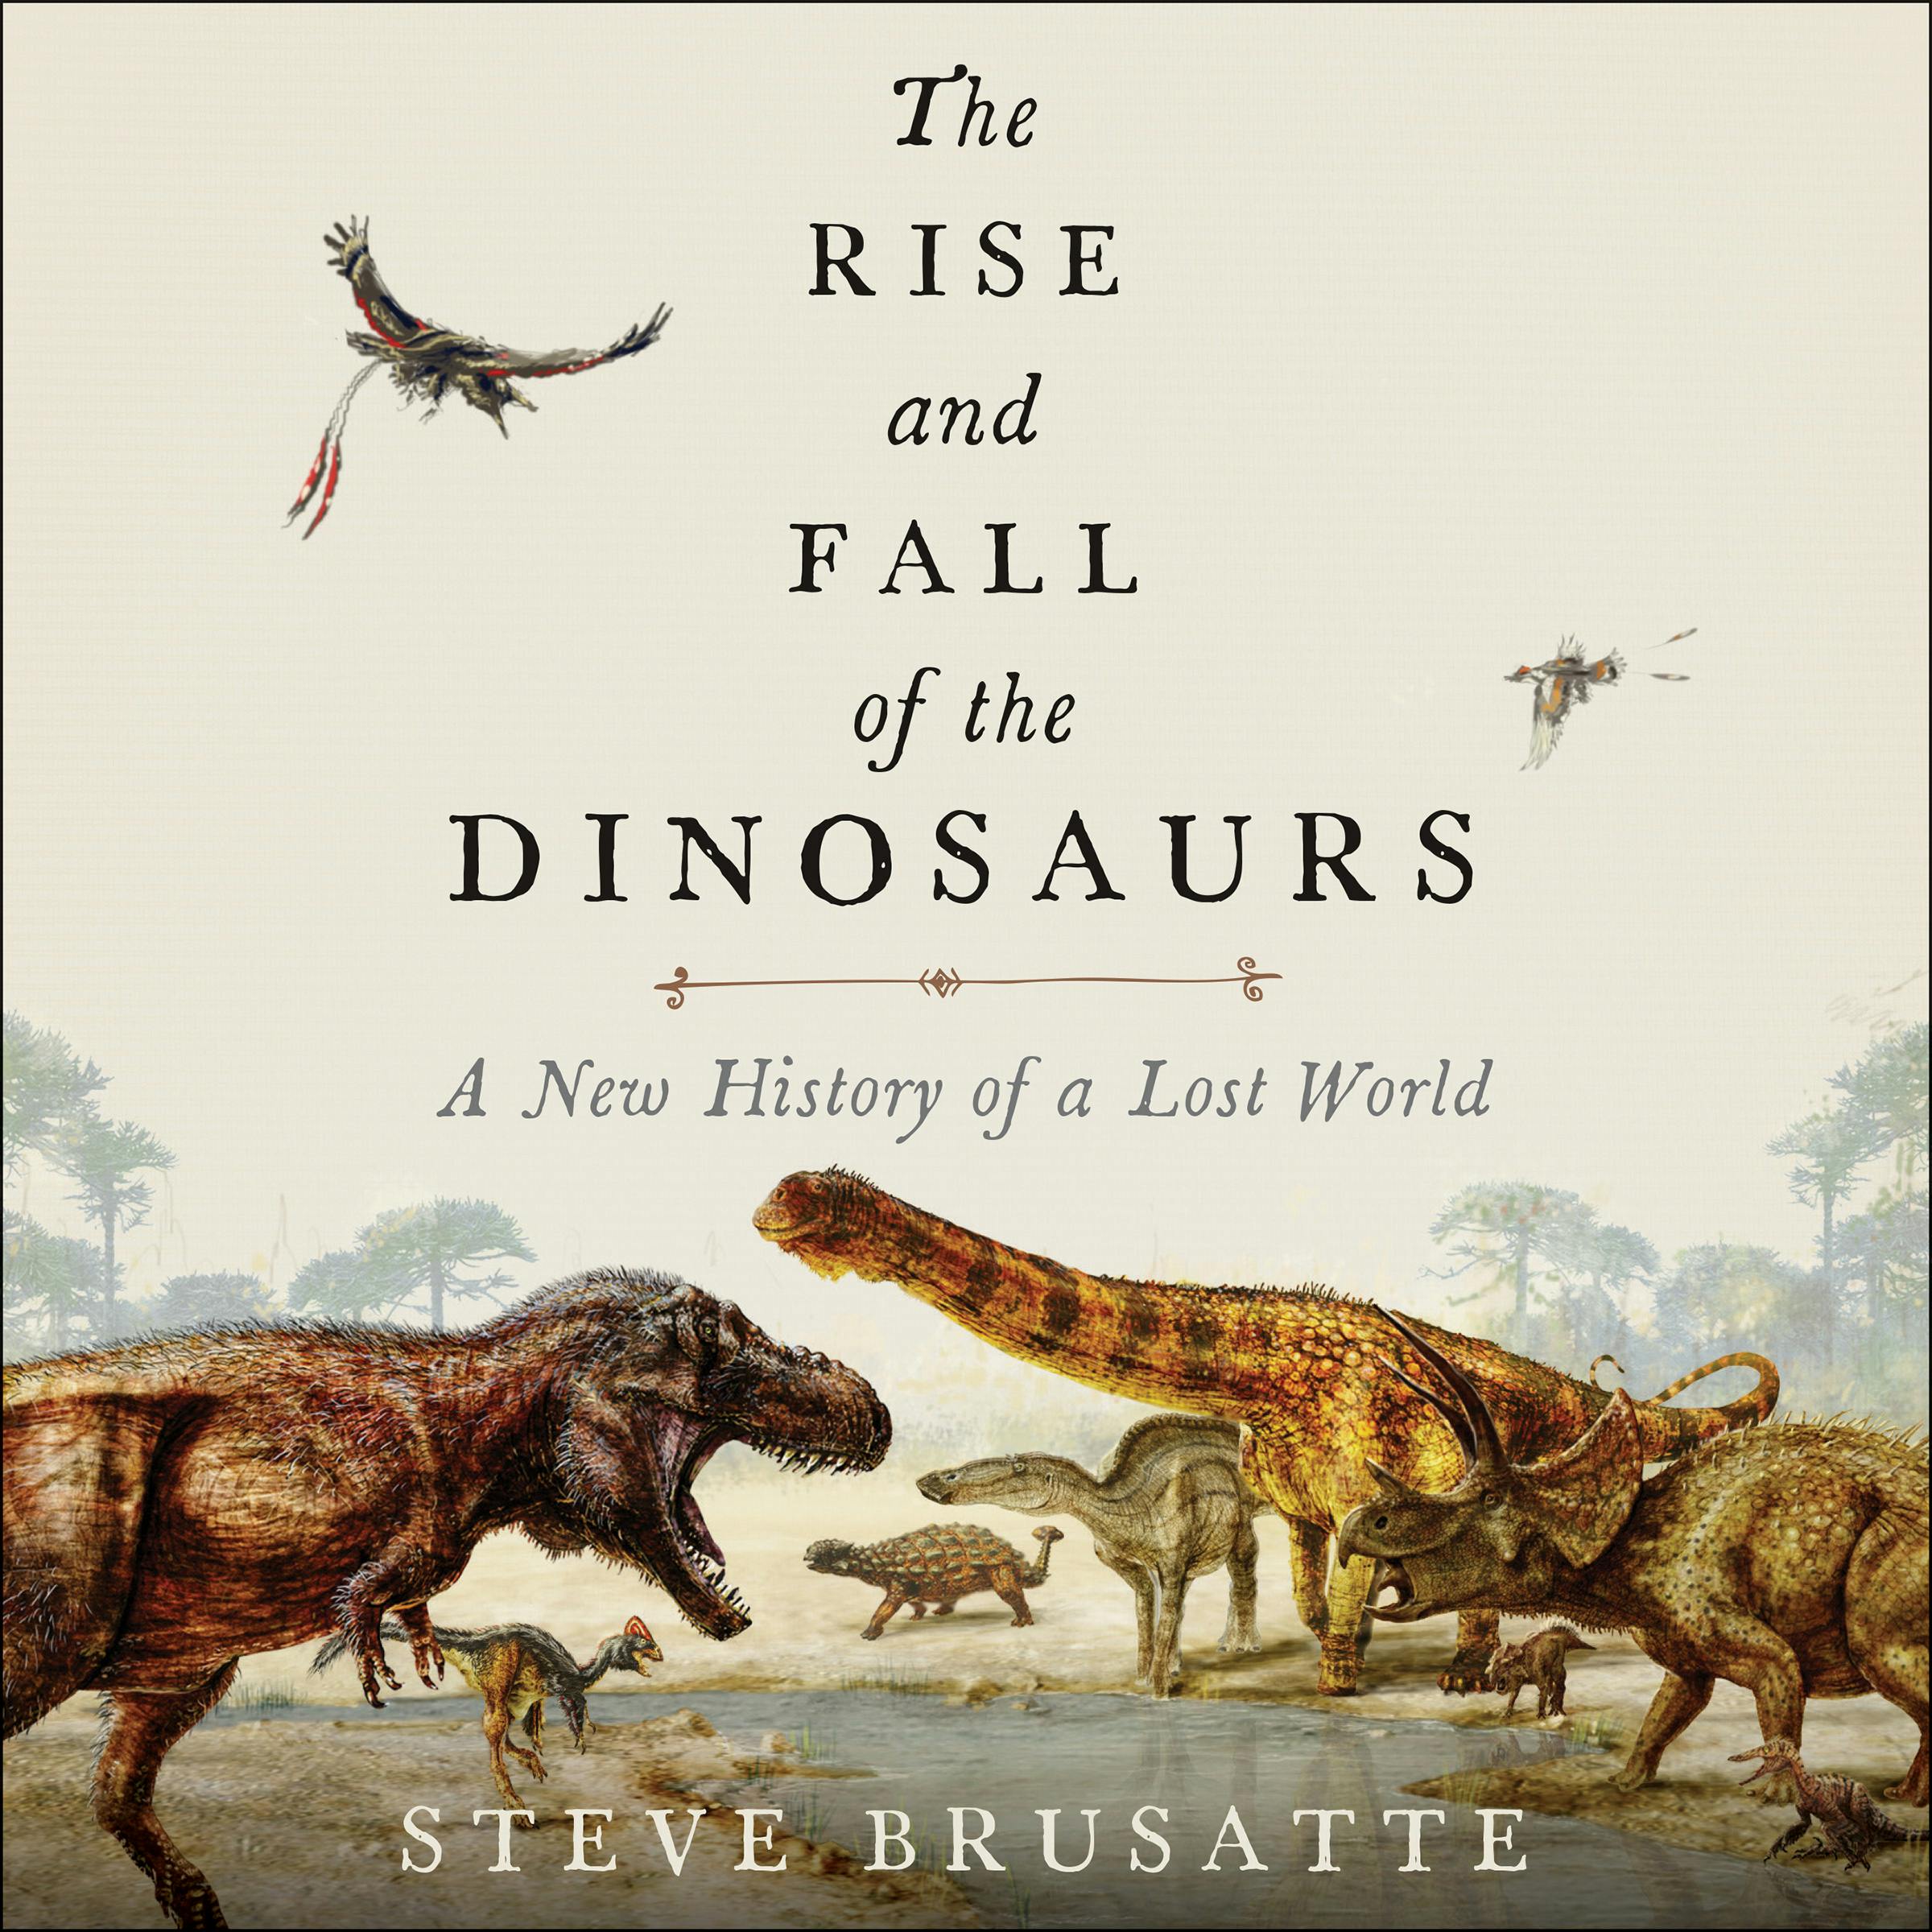 The Rise and Fall of the Dinosaurs: A New History of a Lost World - Steve Brusatte